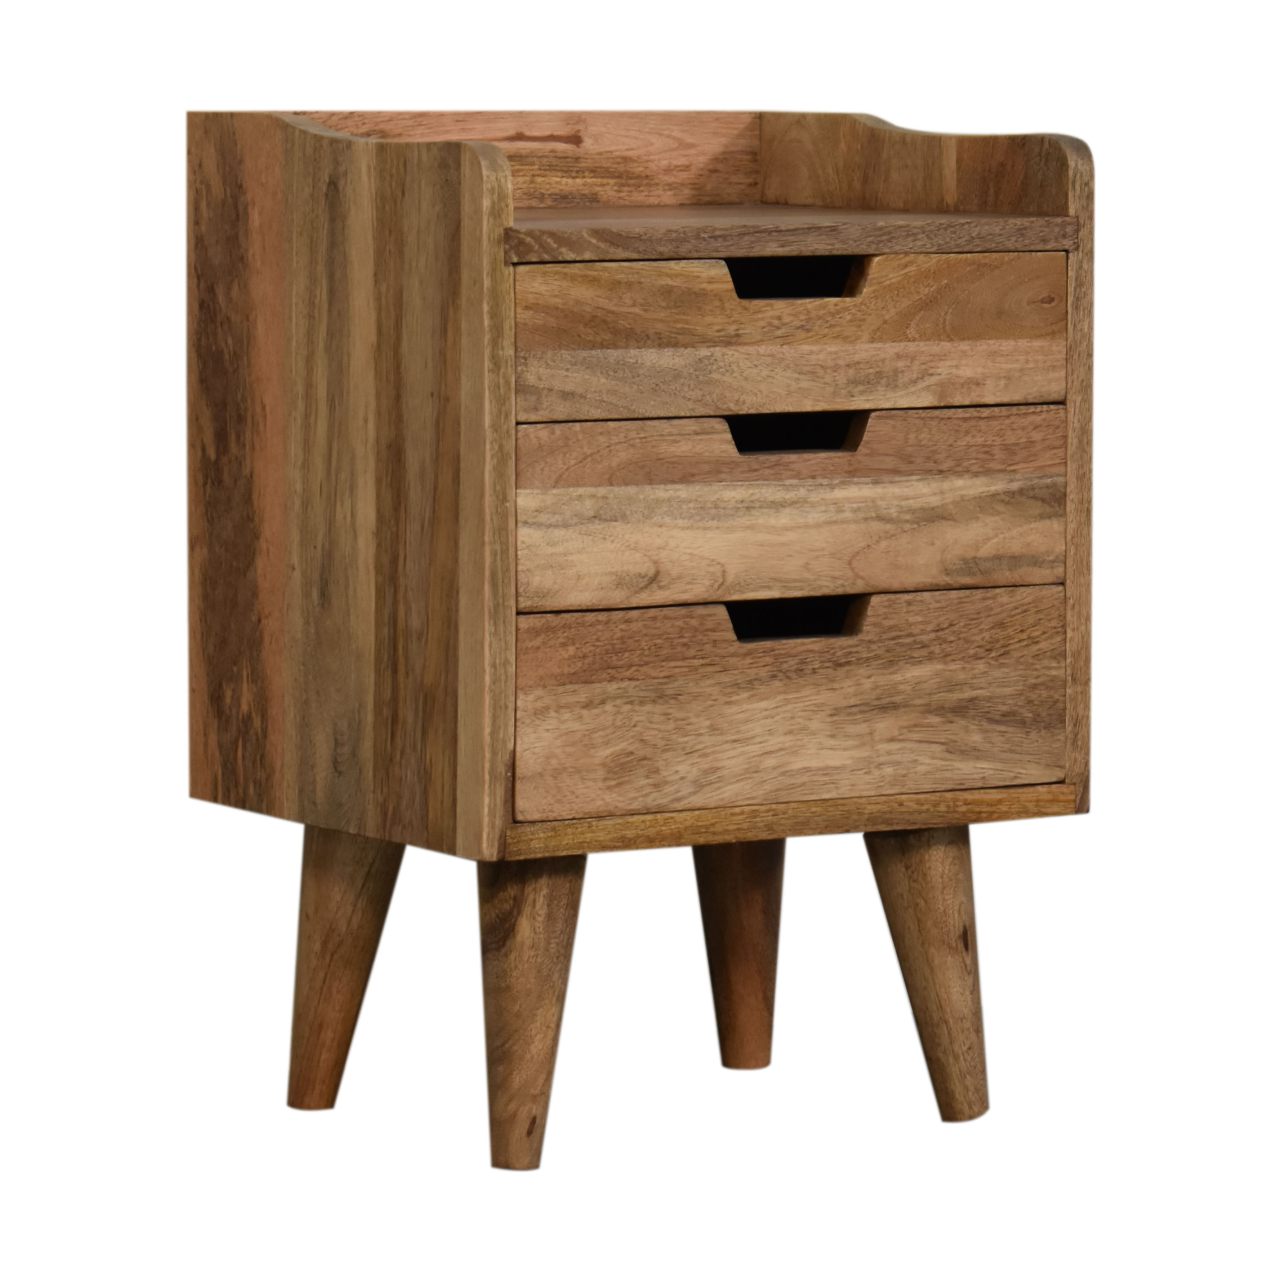 Oak-ish Small Gallery Back Bedside Table 3 Drawer Chest - CasaFenix